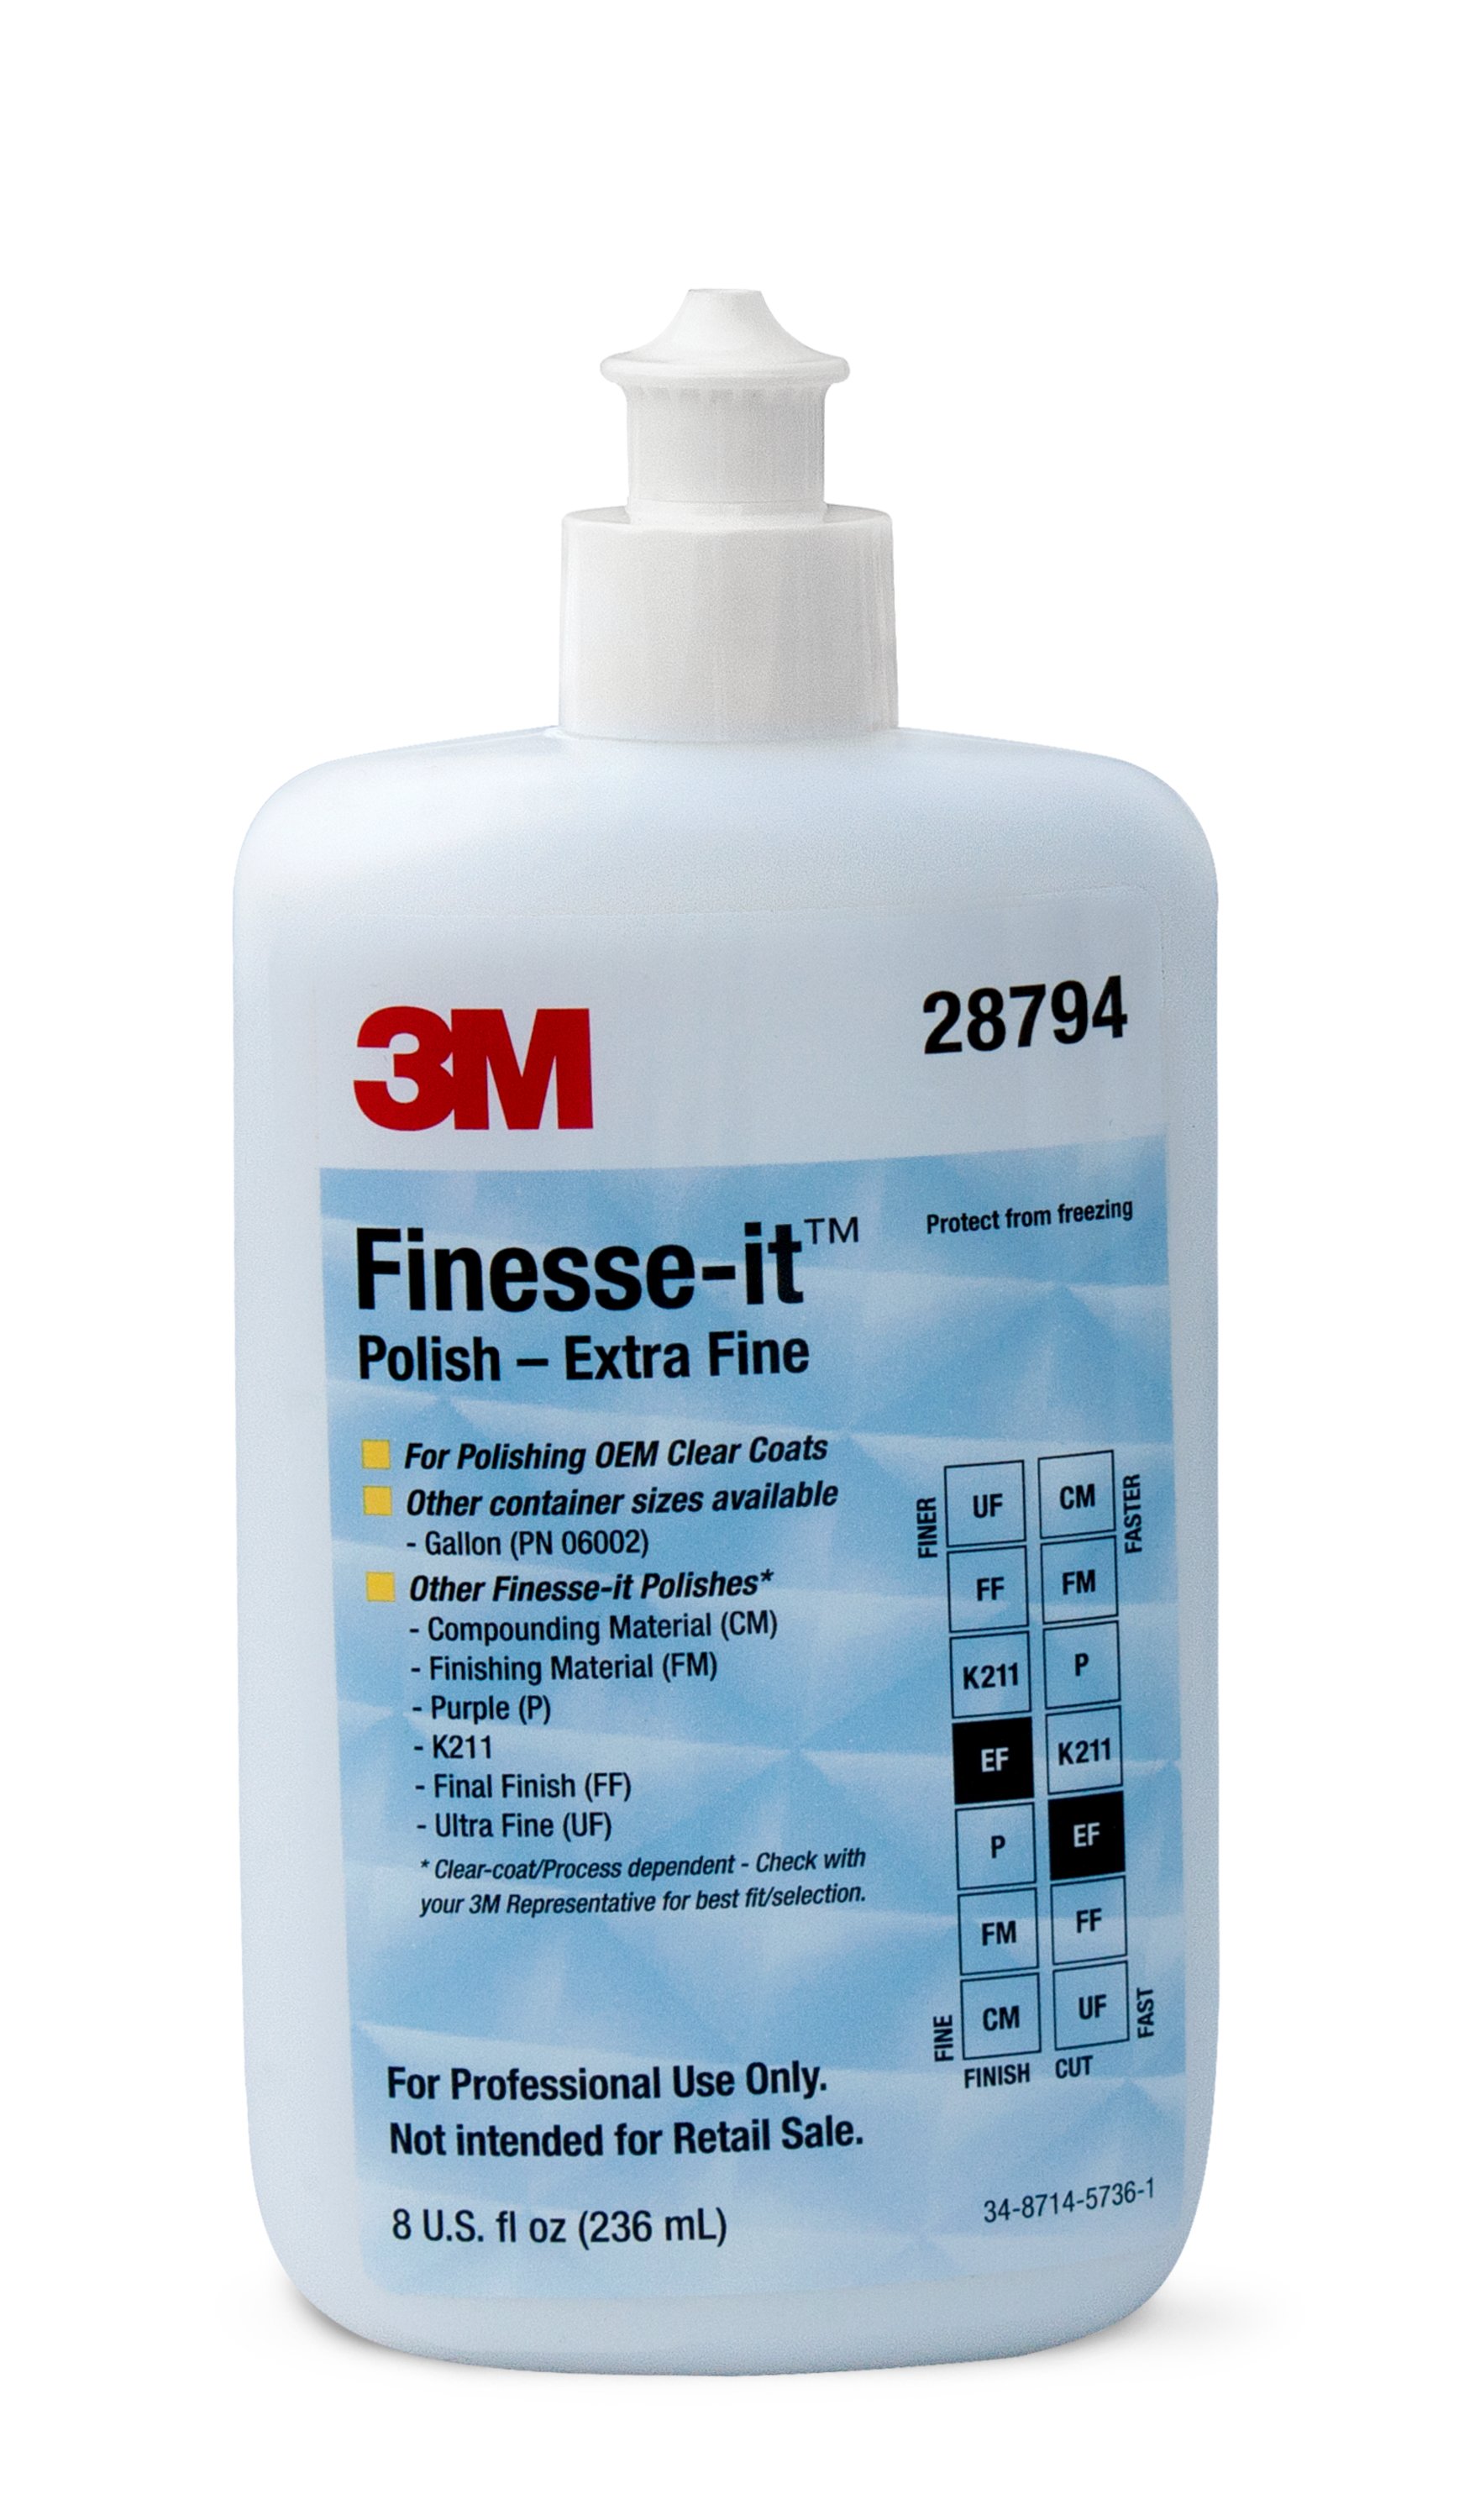 3M™ Finesse-it™ Polish - Extra Fine works well for buffing wood, automotive OEM, marine, and aerospace coatings.